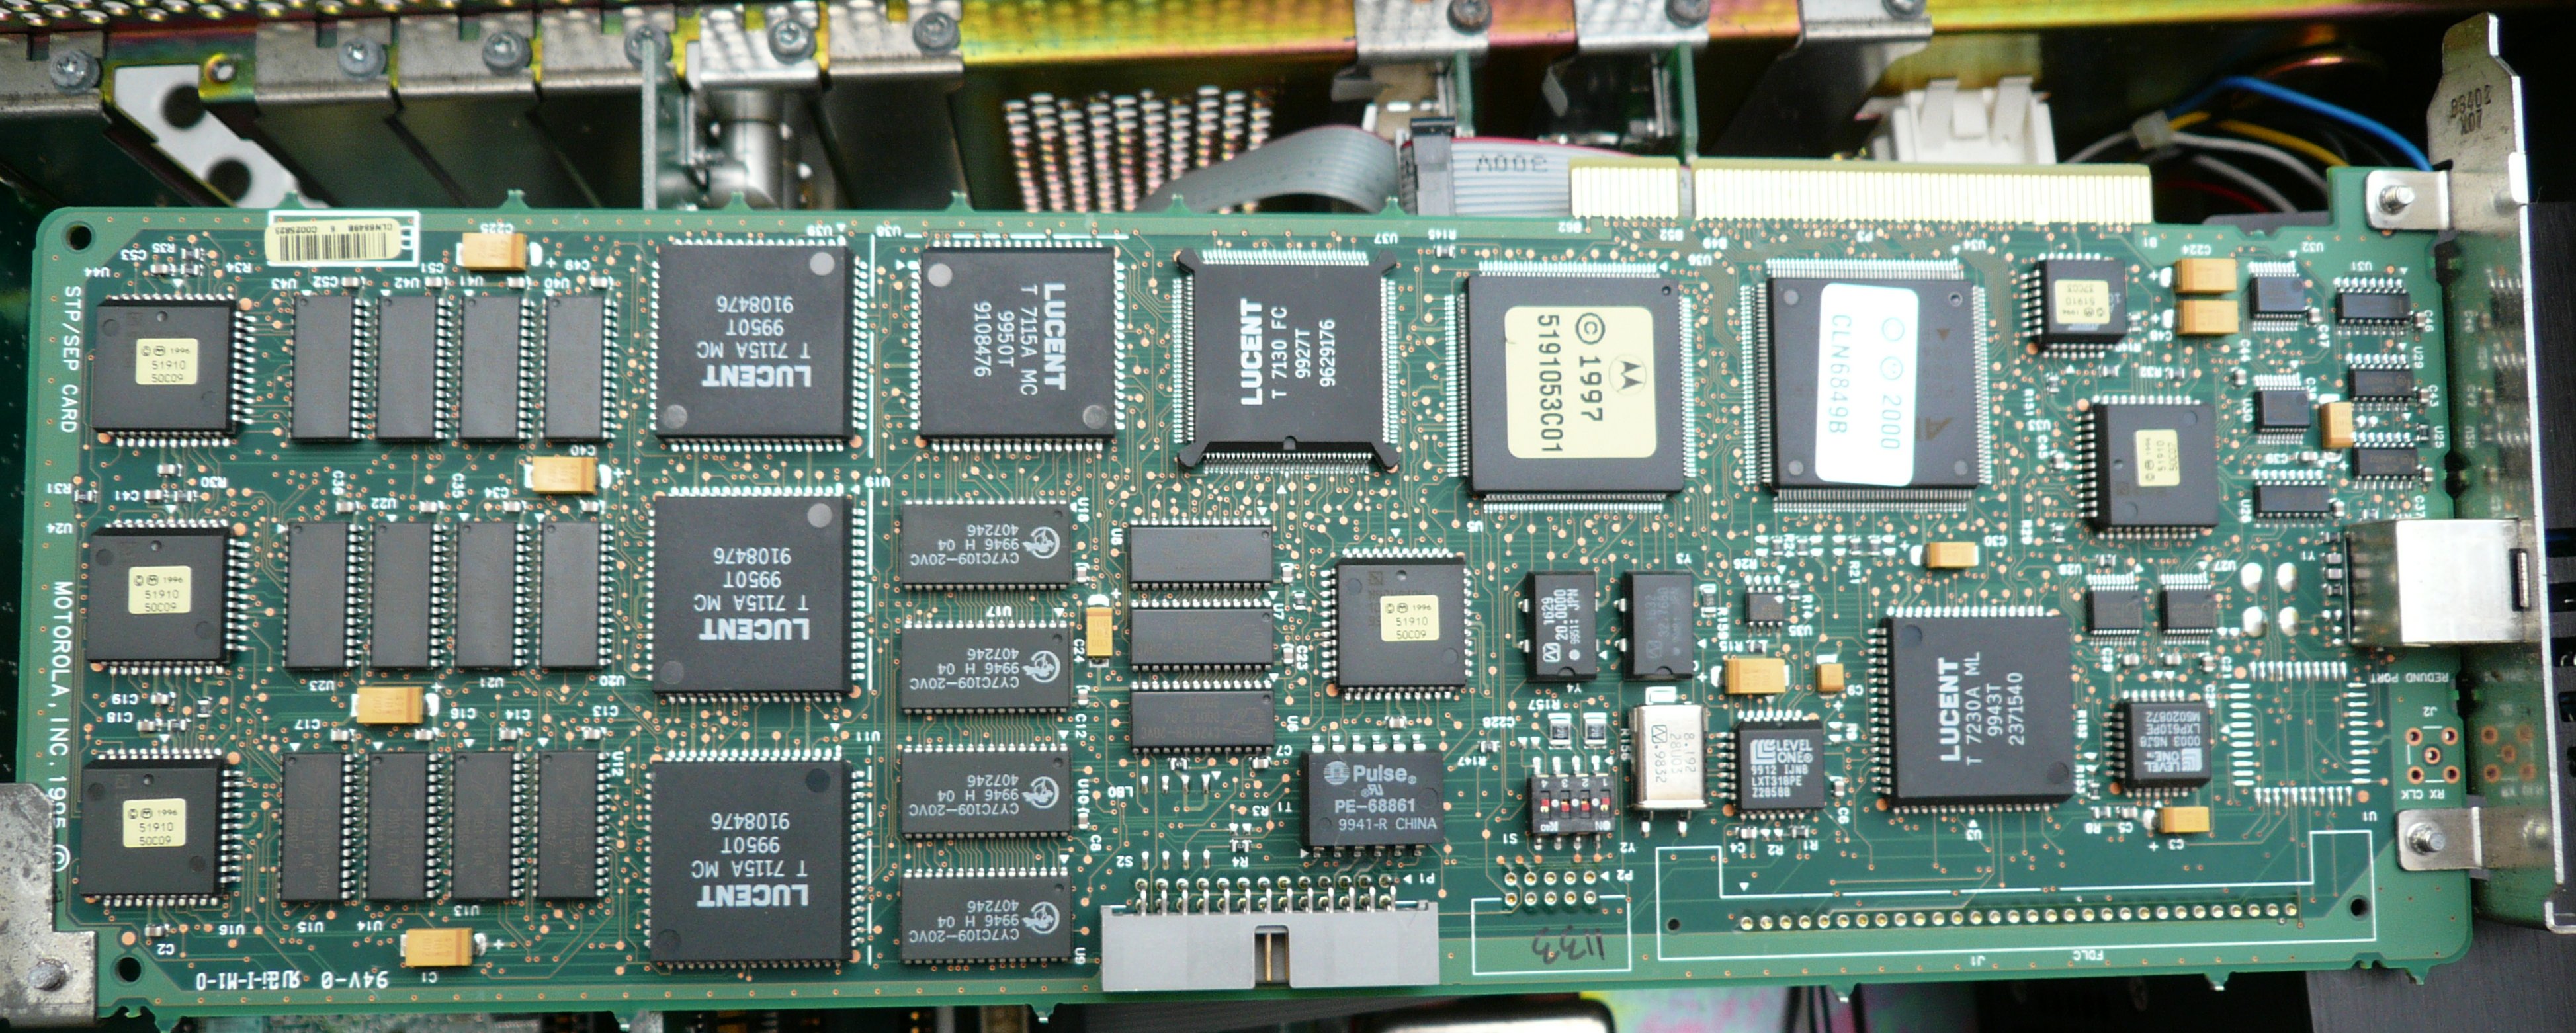 top view of the PCI card with lucent chips